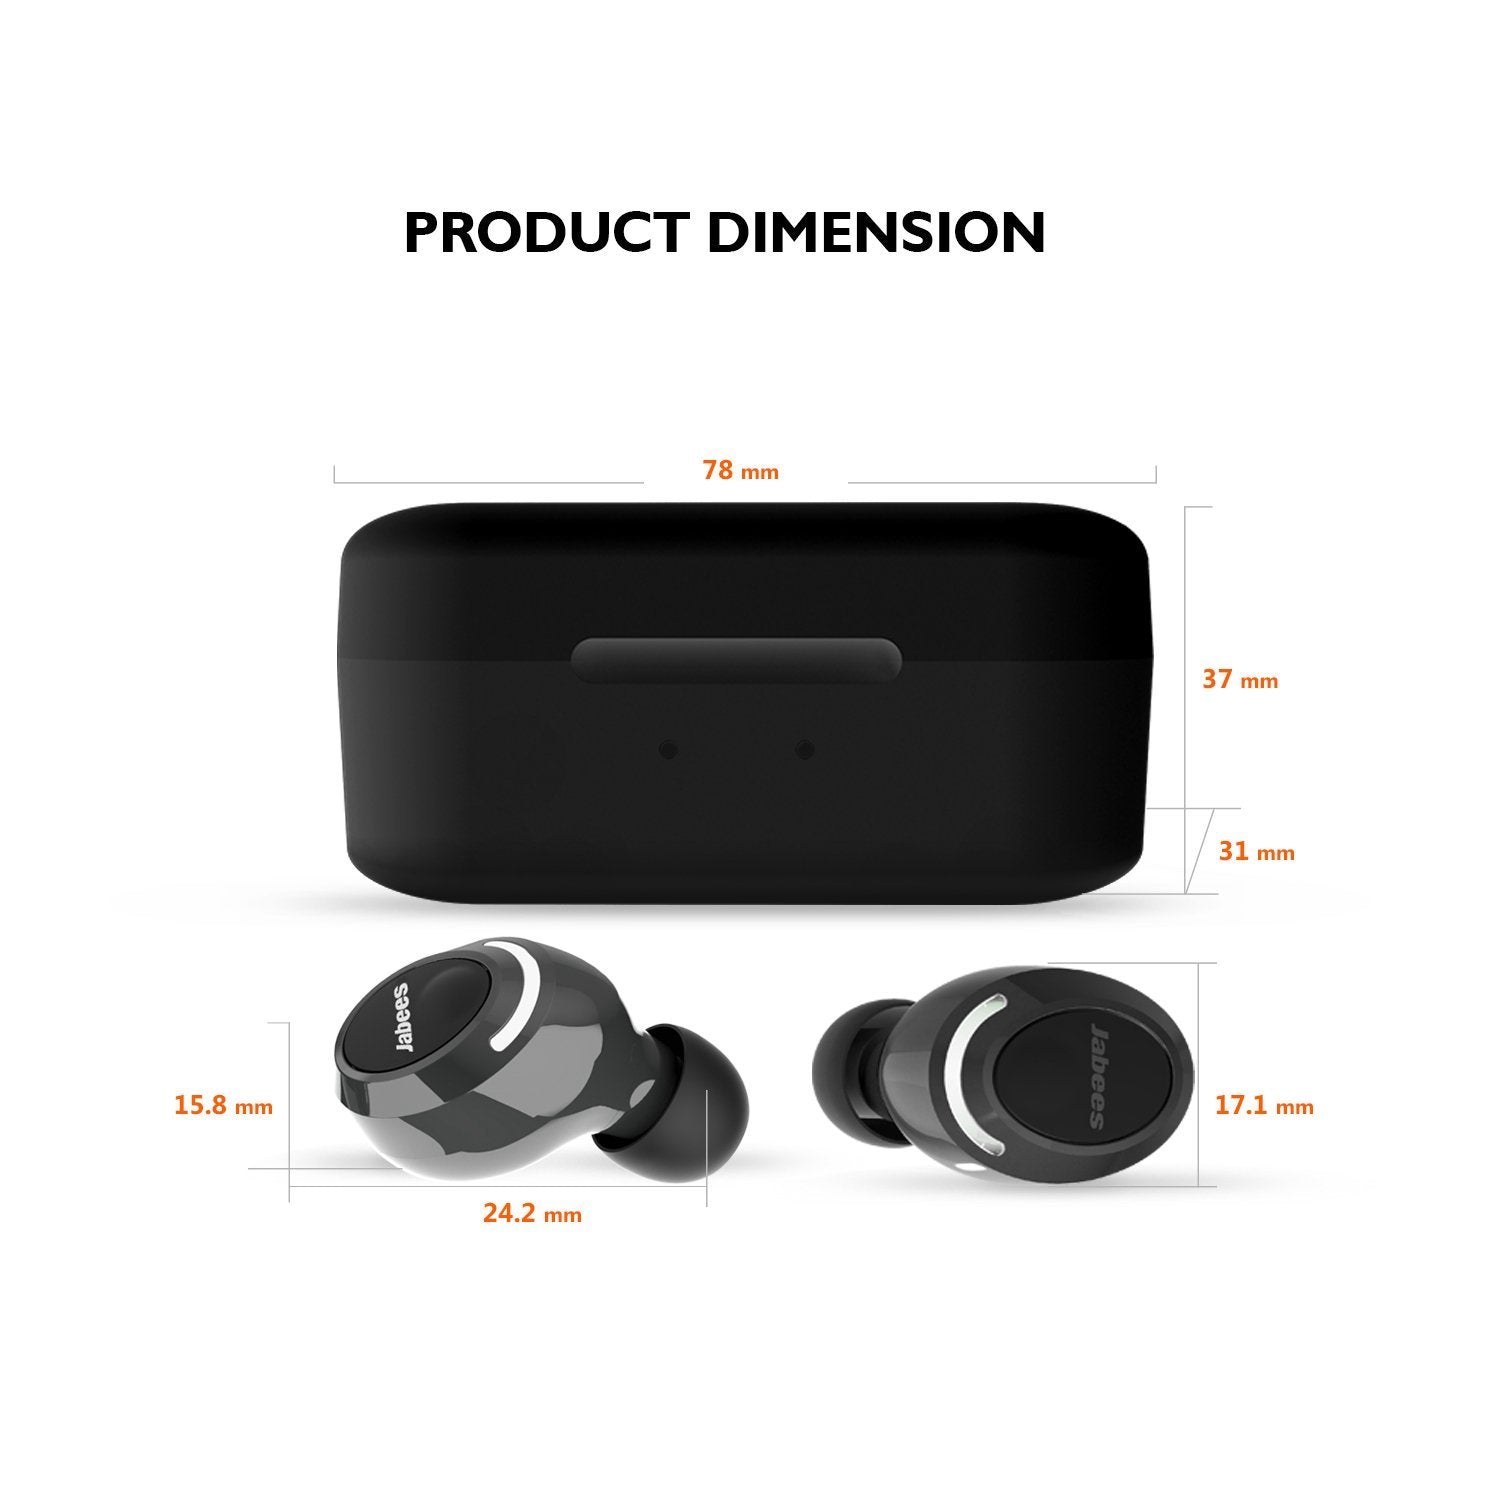 Firefly Pro - True Wireless Earbuds Featuring Fast Charging & Qi-Enabled Wireless Charging Case - True Wireless Earbuds - Jabees Store - jabeesstore